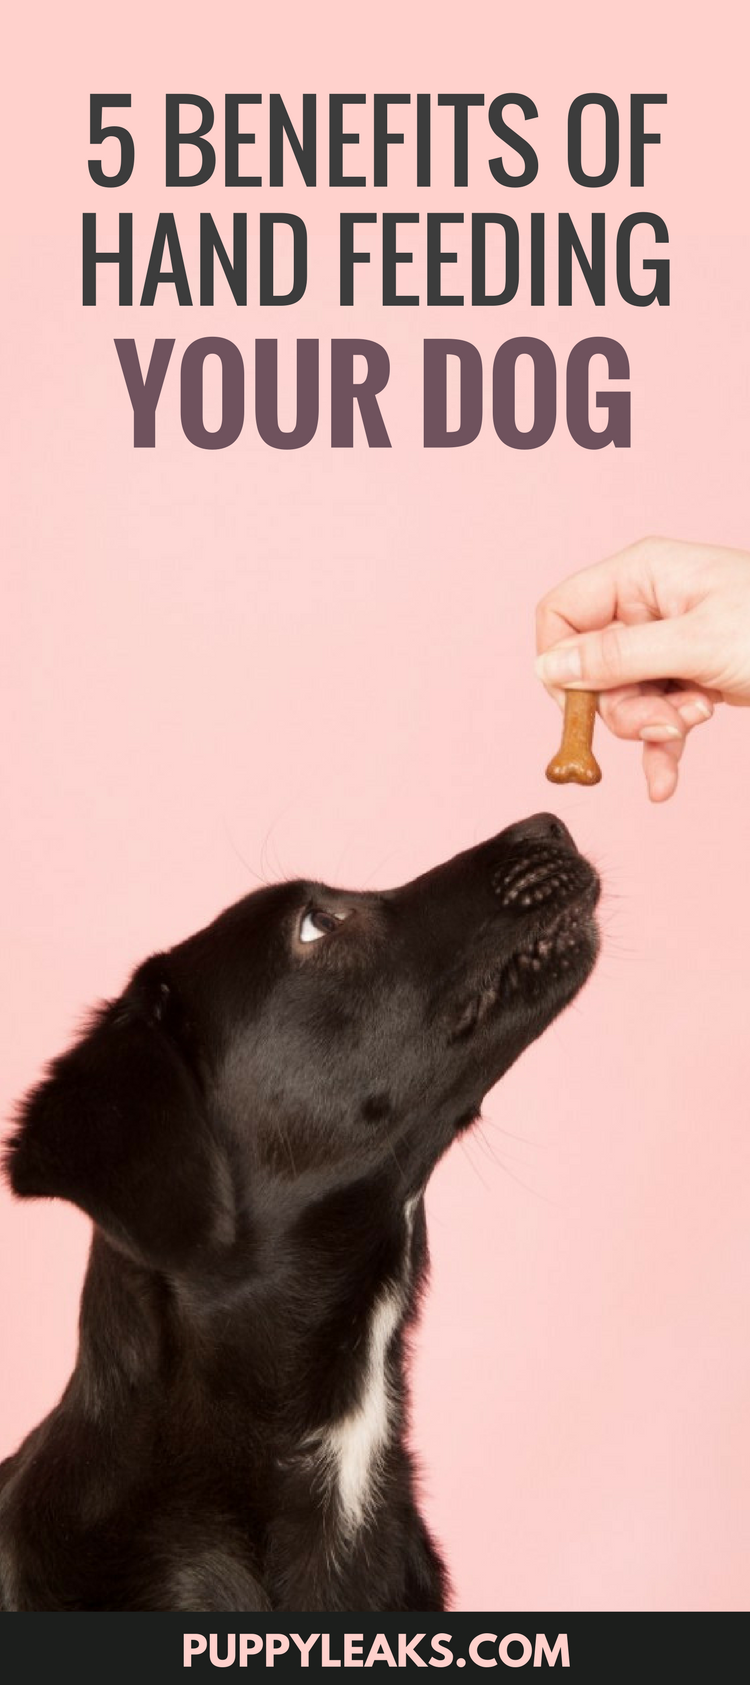 Looking for an easy way to teach your dog good manners, boost their confidence and strengthen your bond? Try feeding your dog by hand. Here